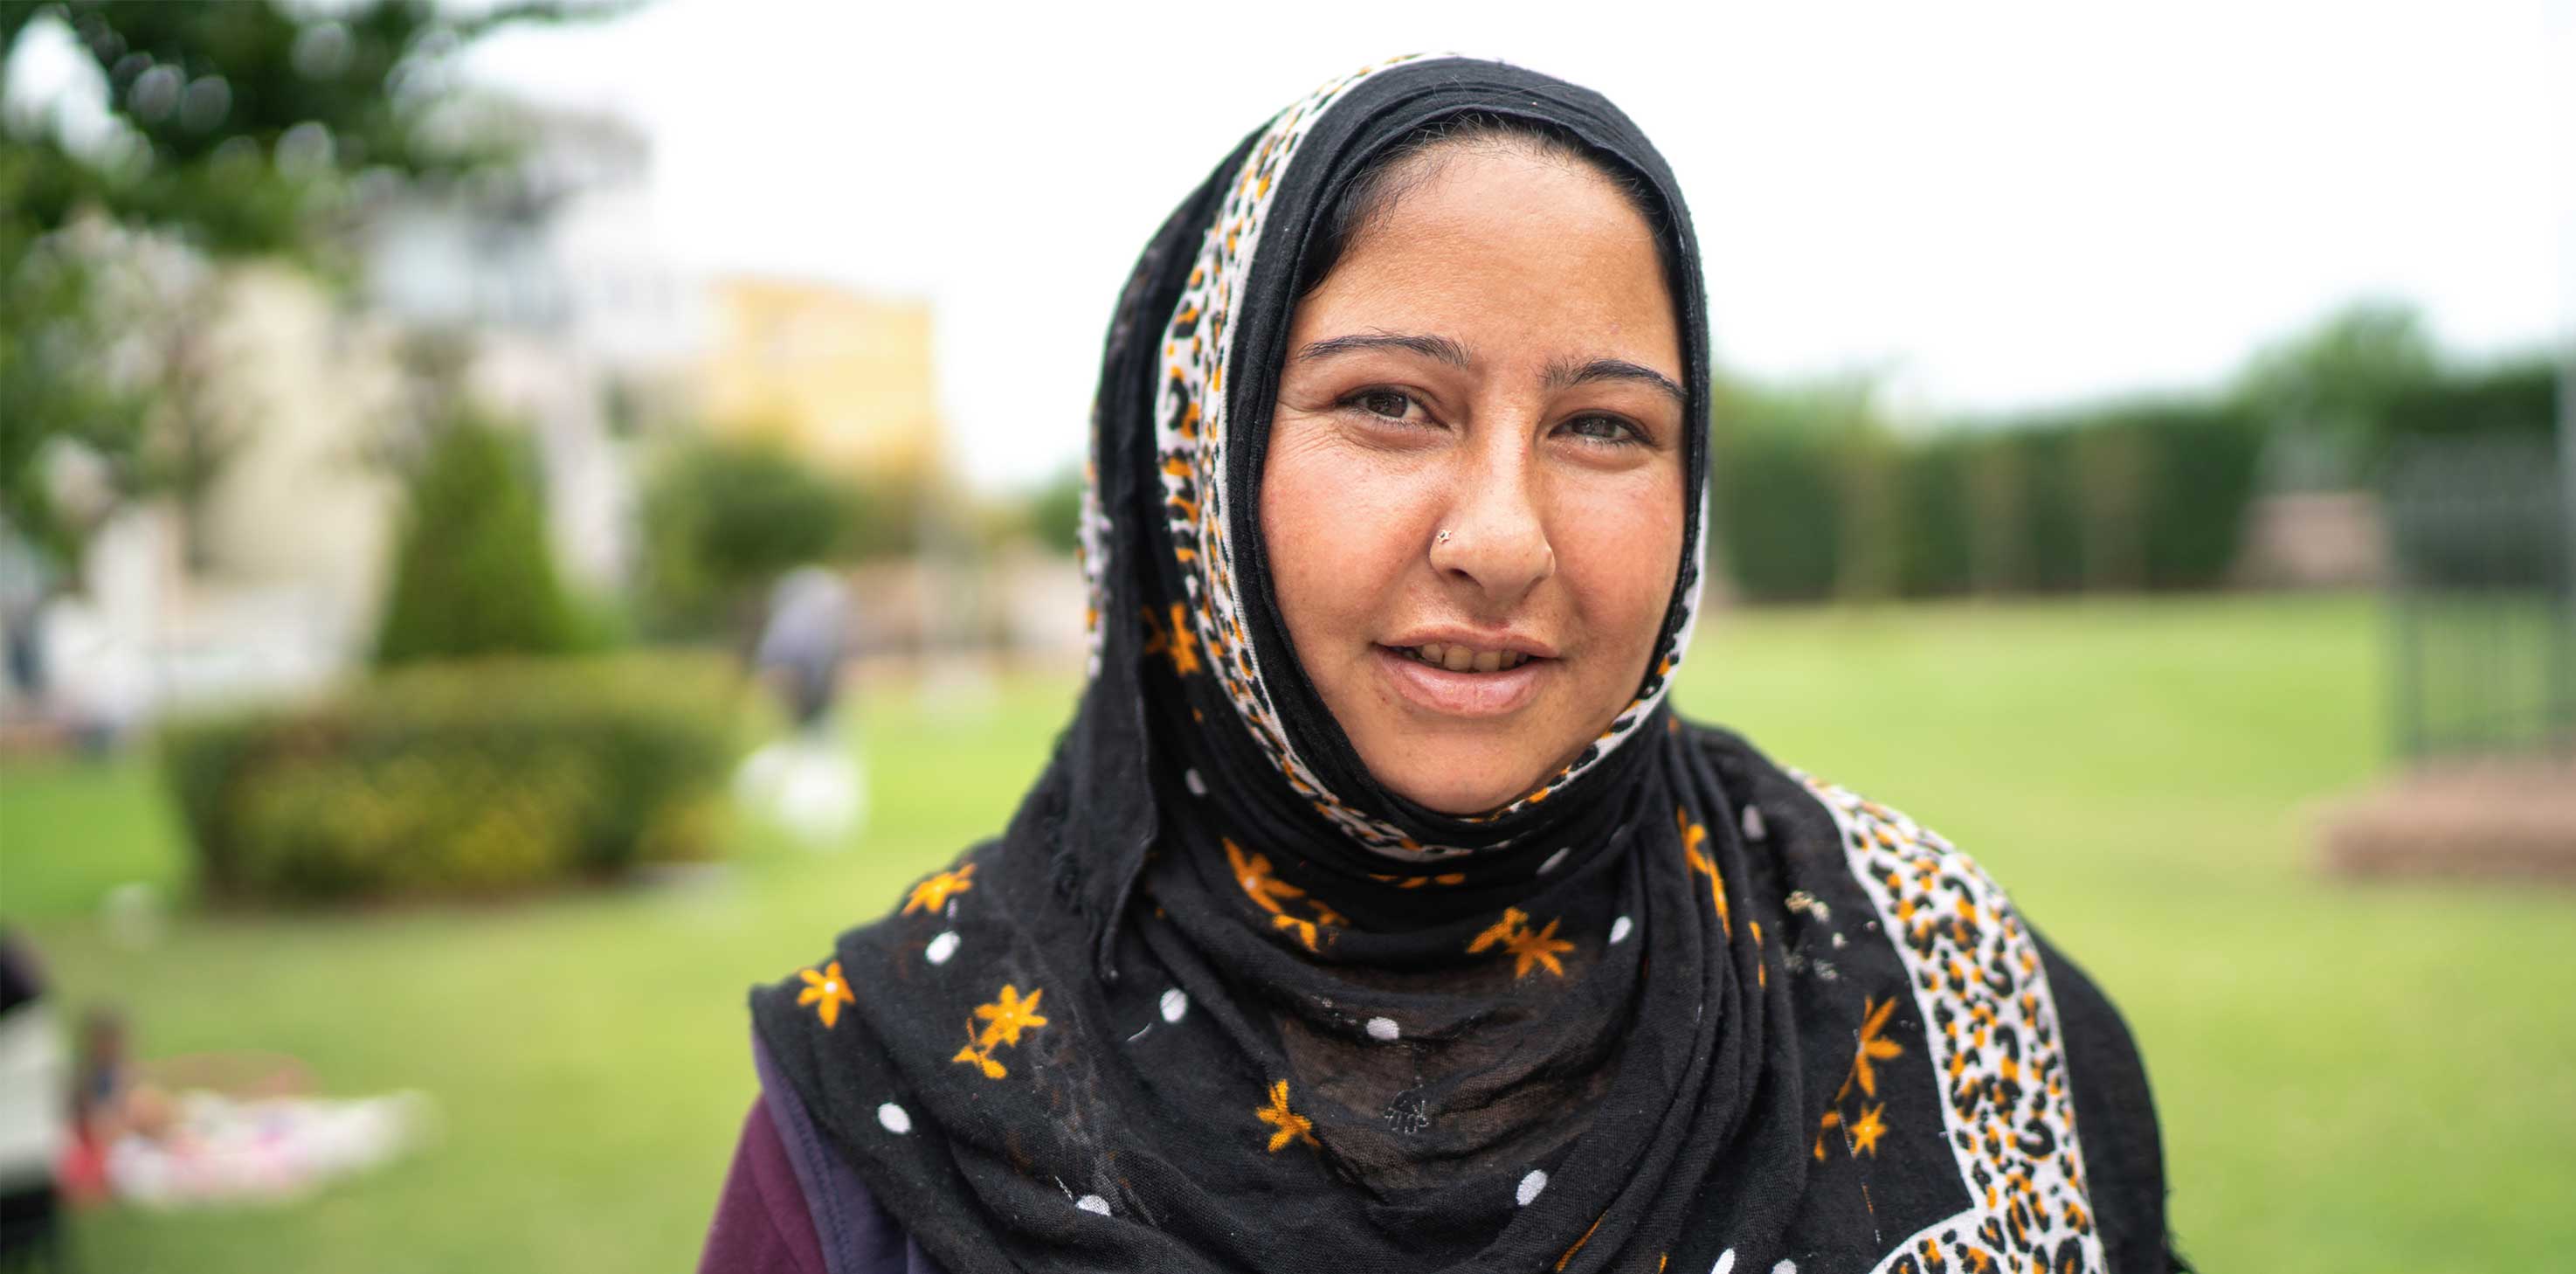 A headshot of a woman of South Asian descent wearing a hijab, smiling softly at the camera.